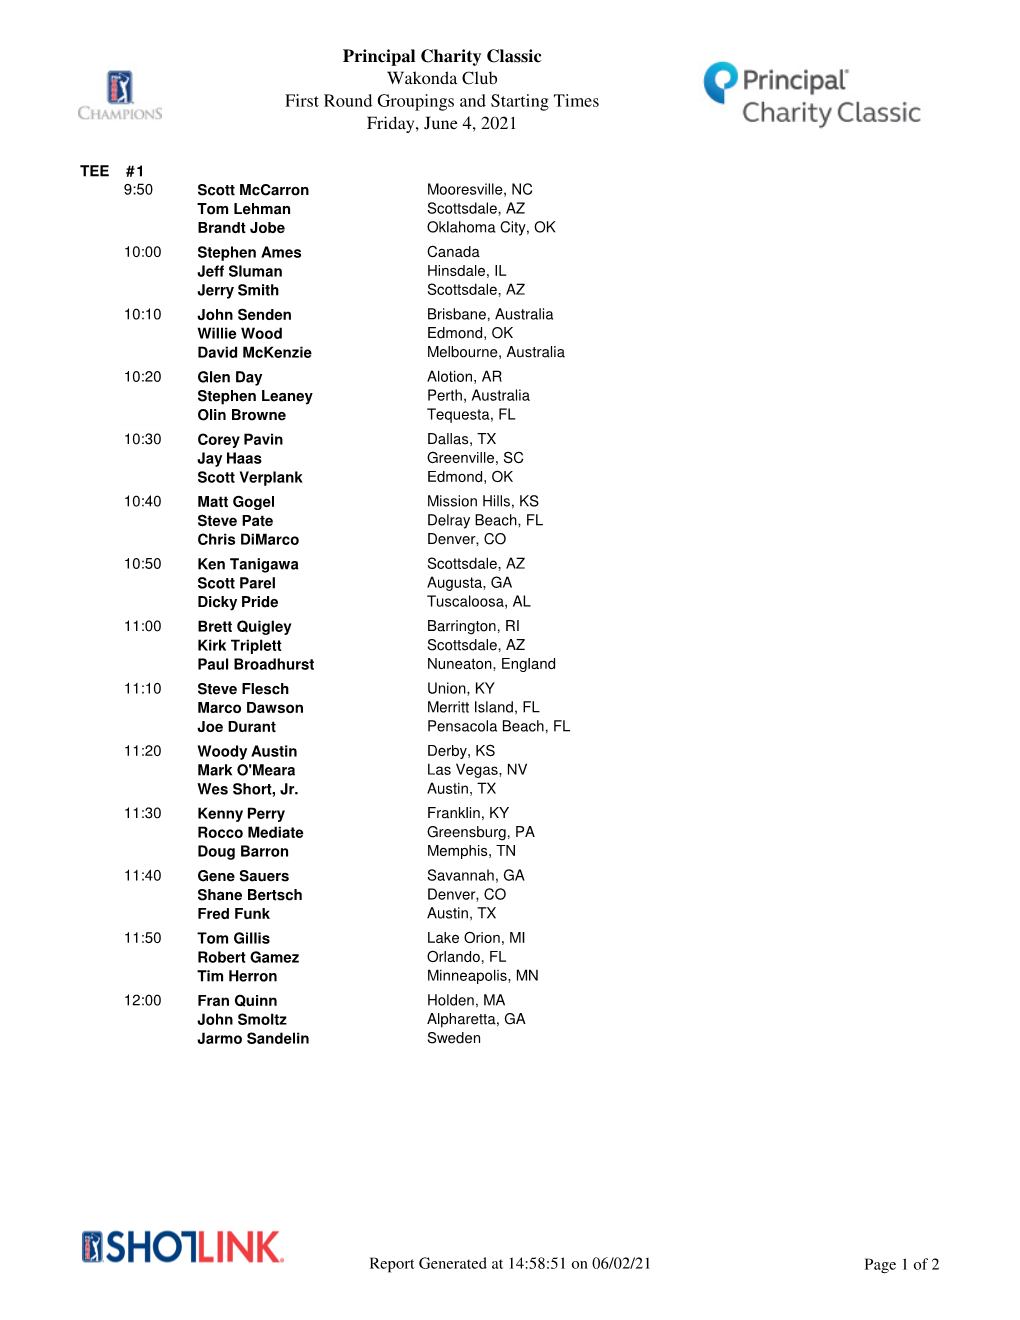 Principal Charity Classic Wakonda Club First Round Groupings and Starting Times Friday, June 4, 2021